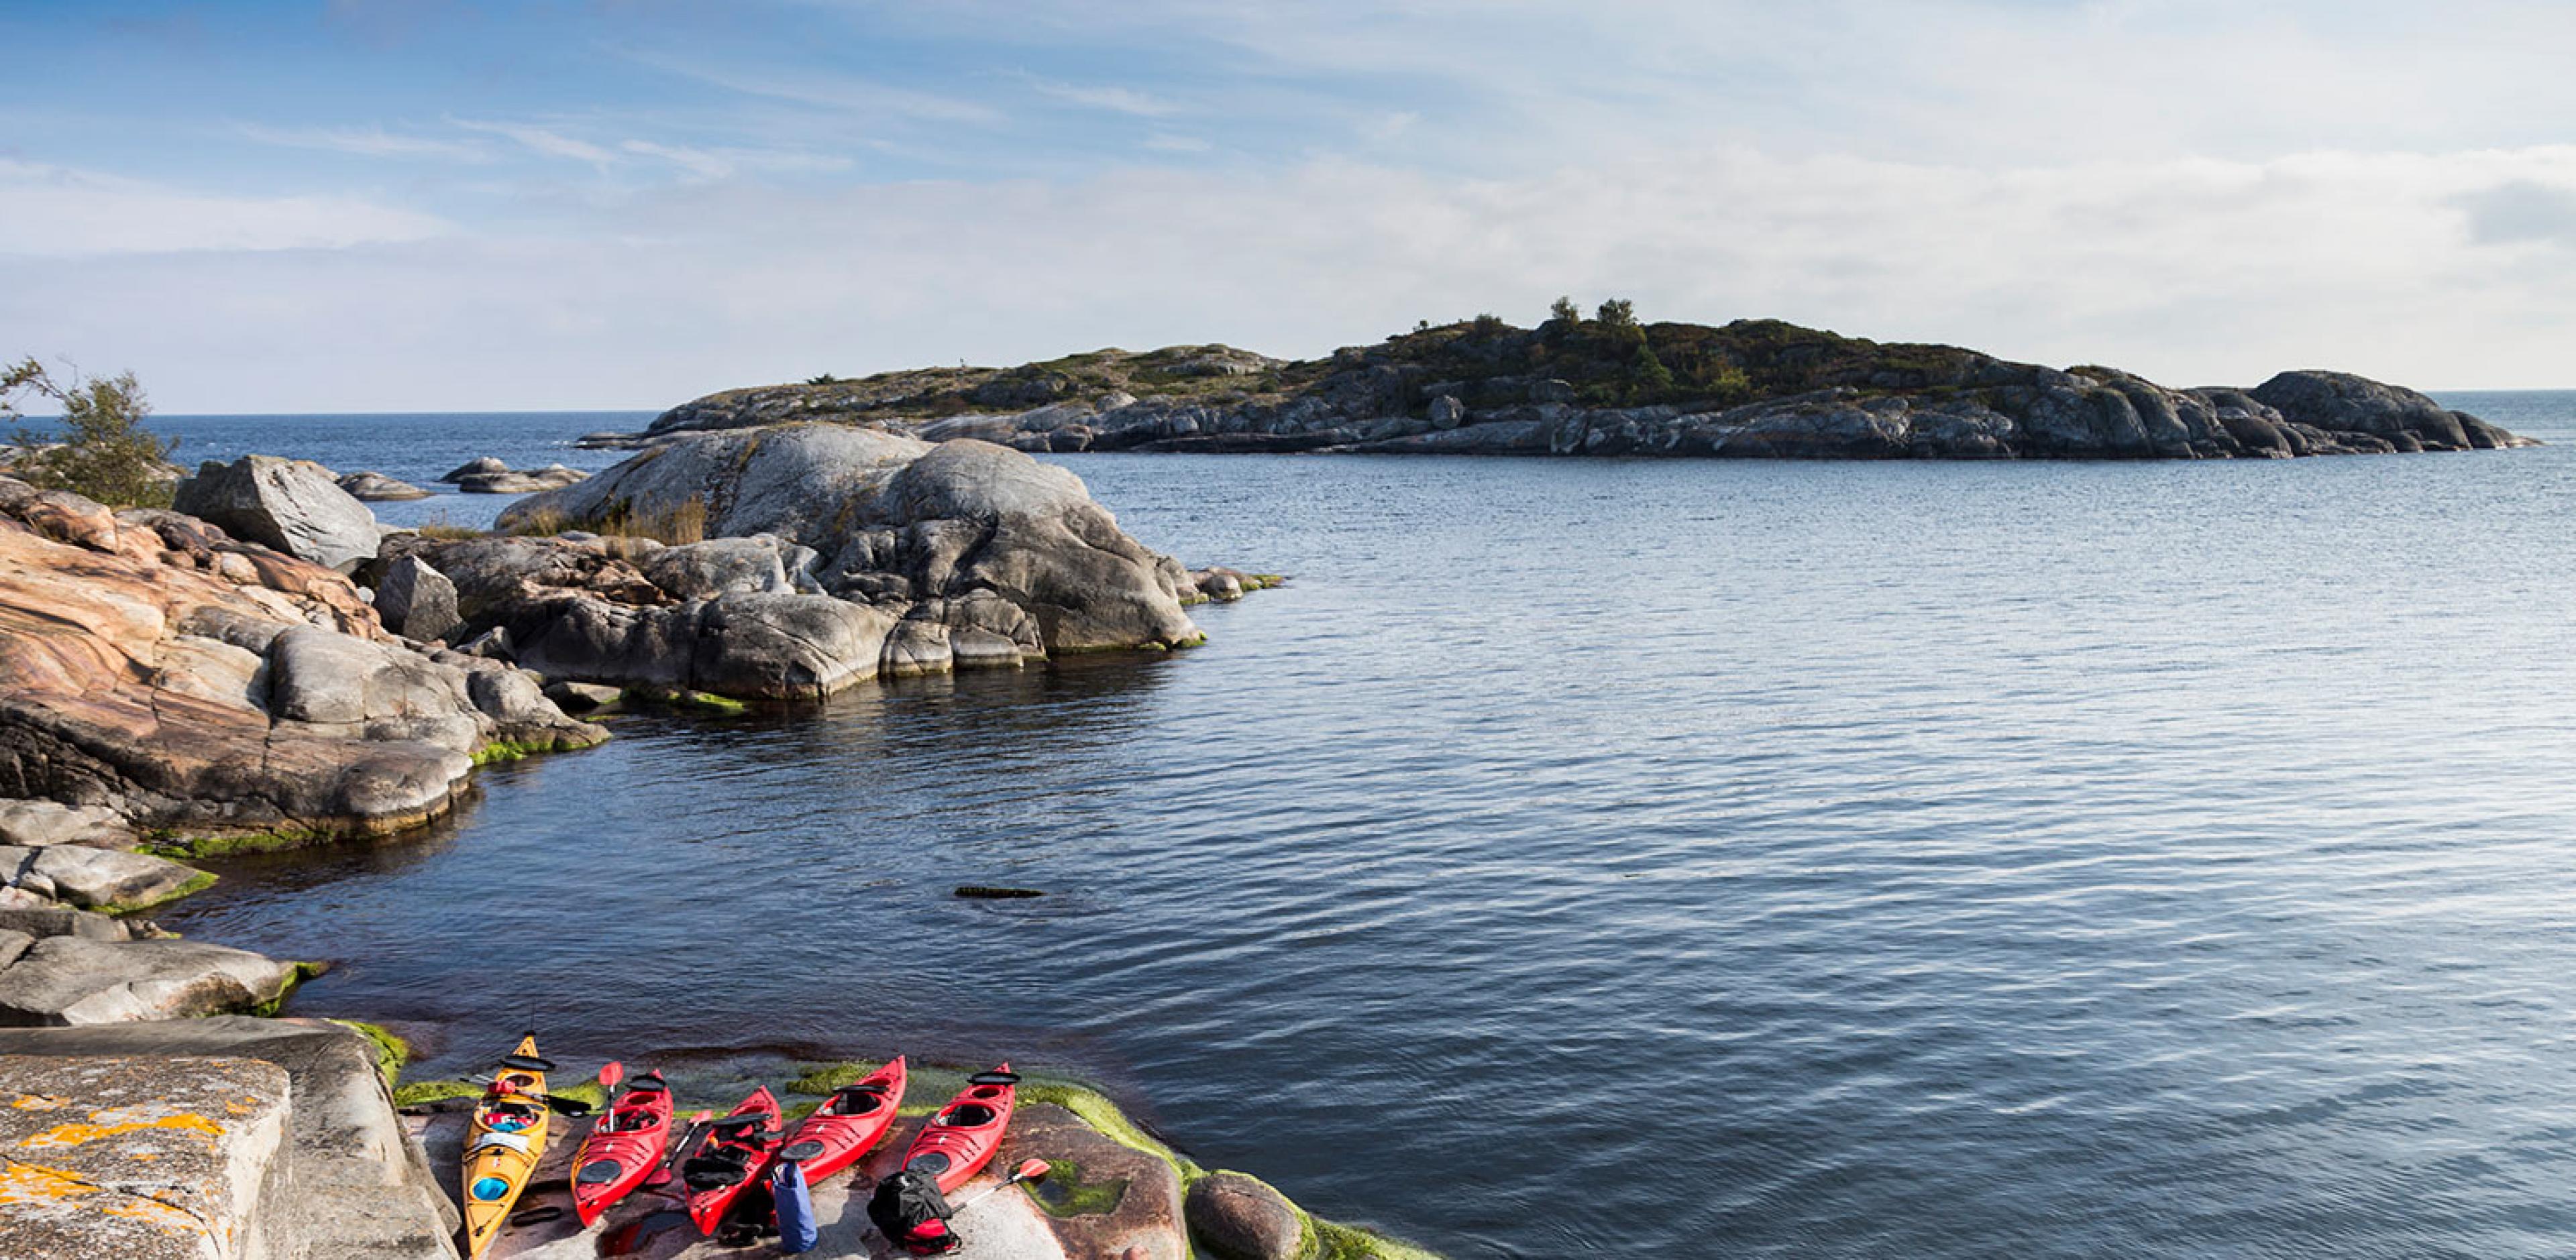 red kayaks on a rocky coast with island in background